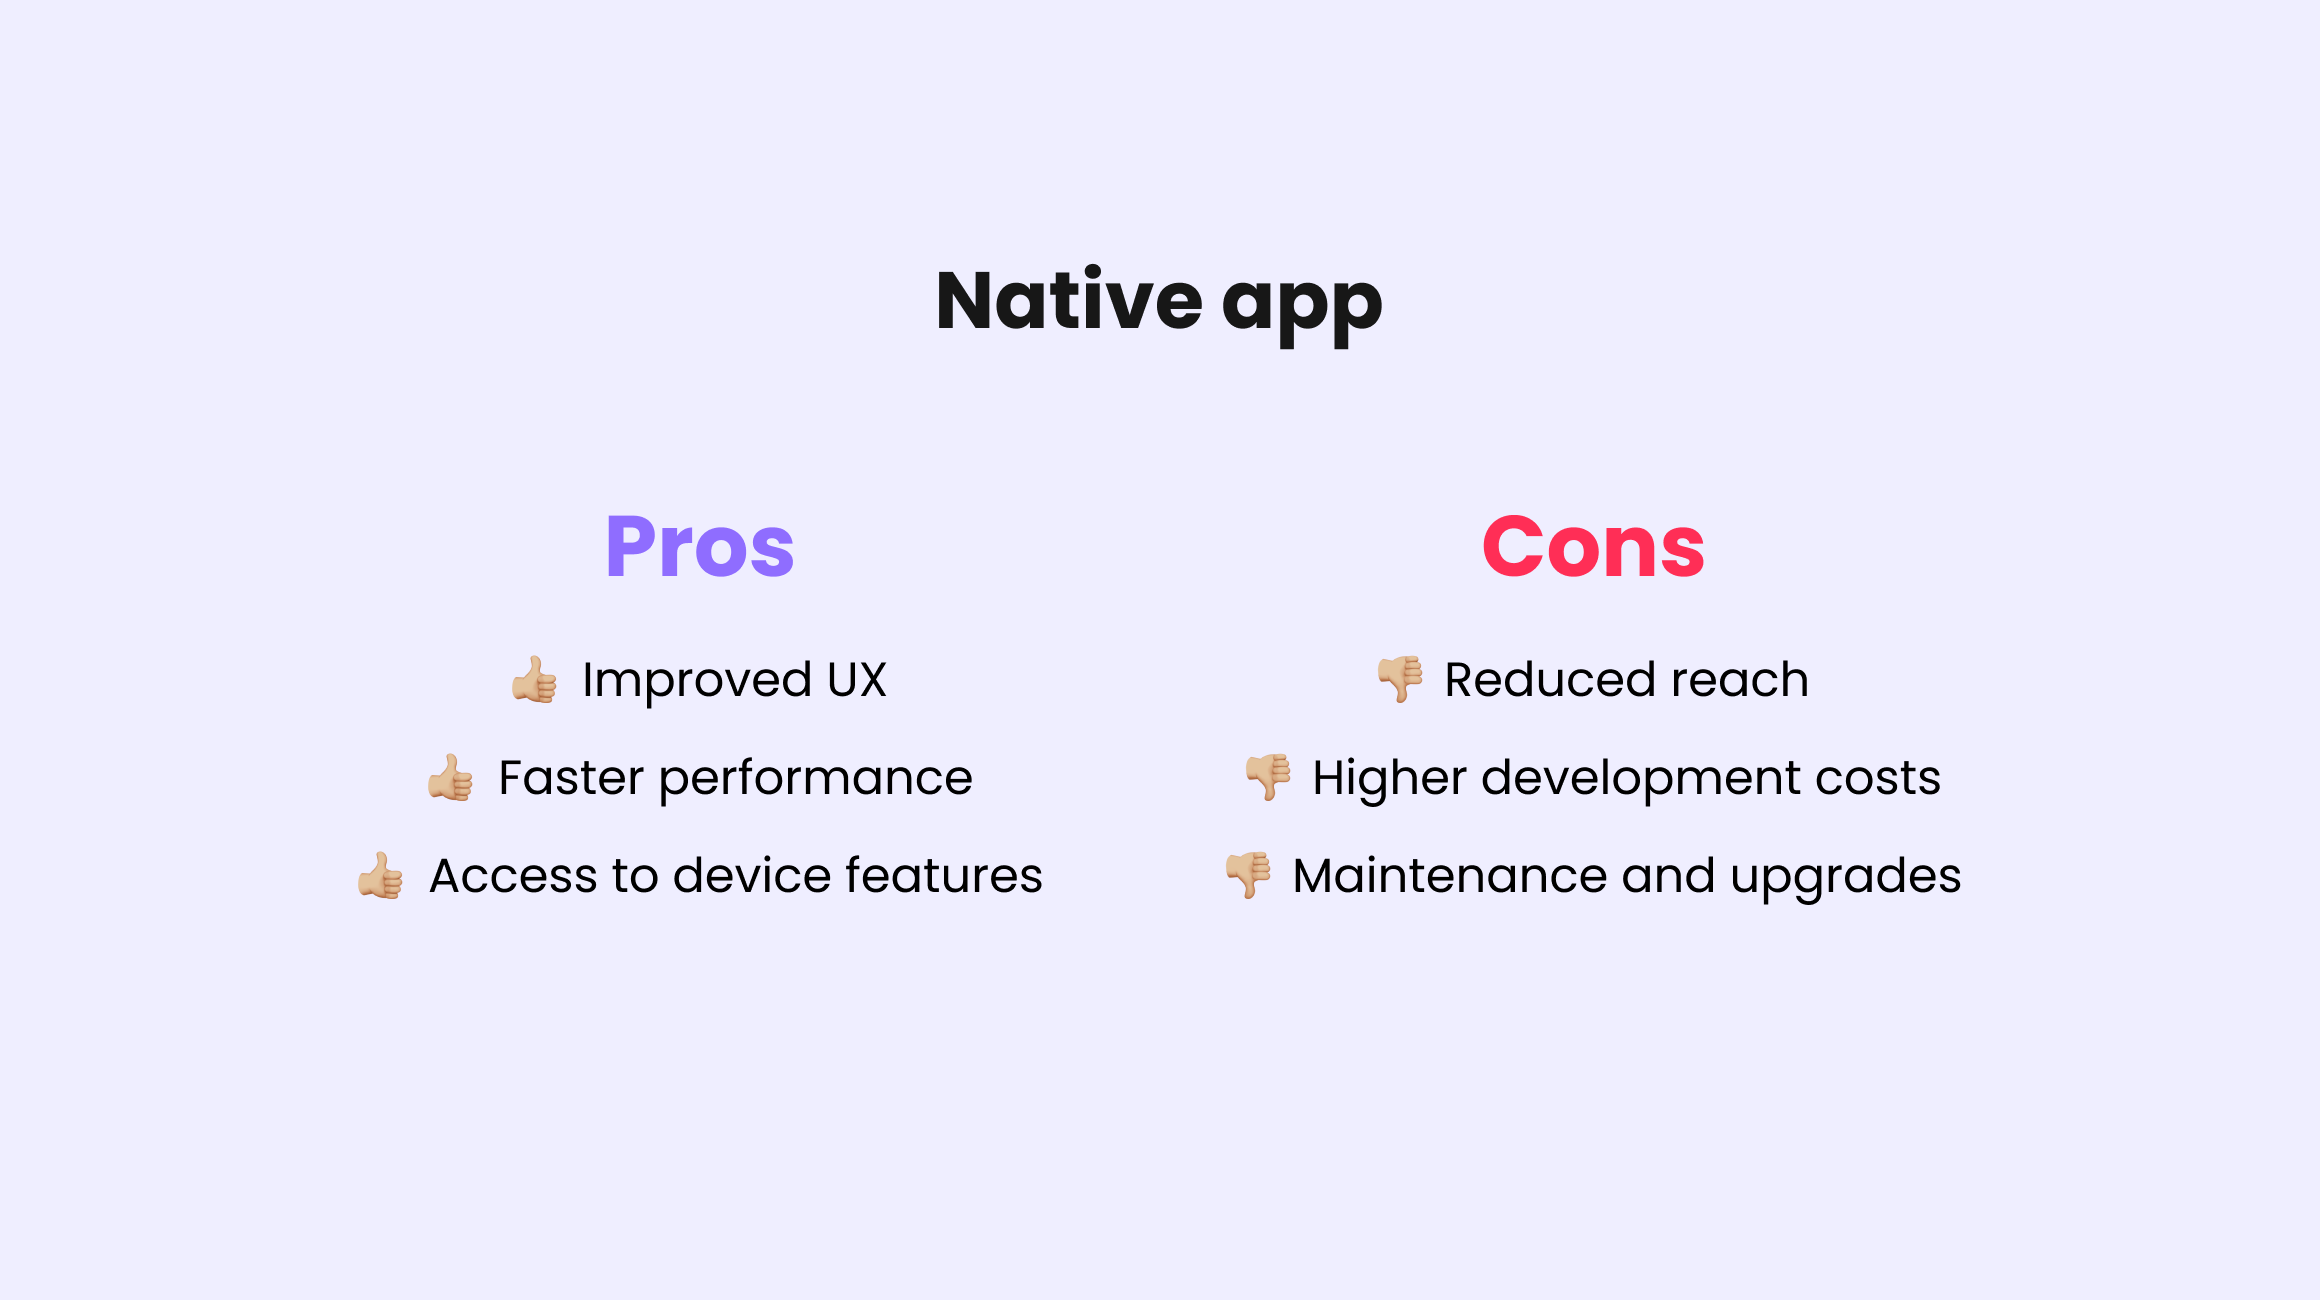 Native app pros and cons